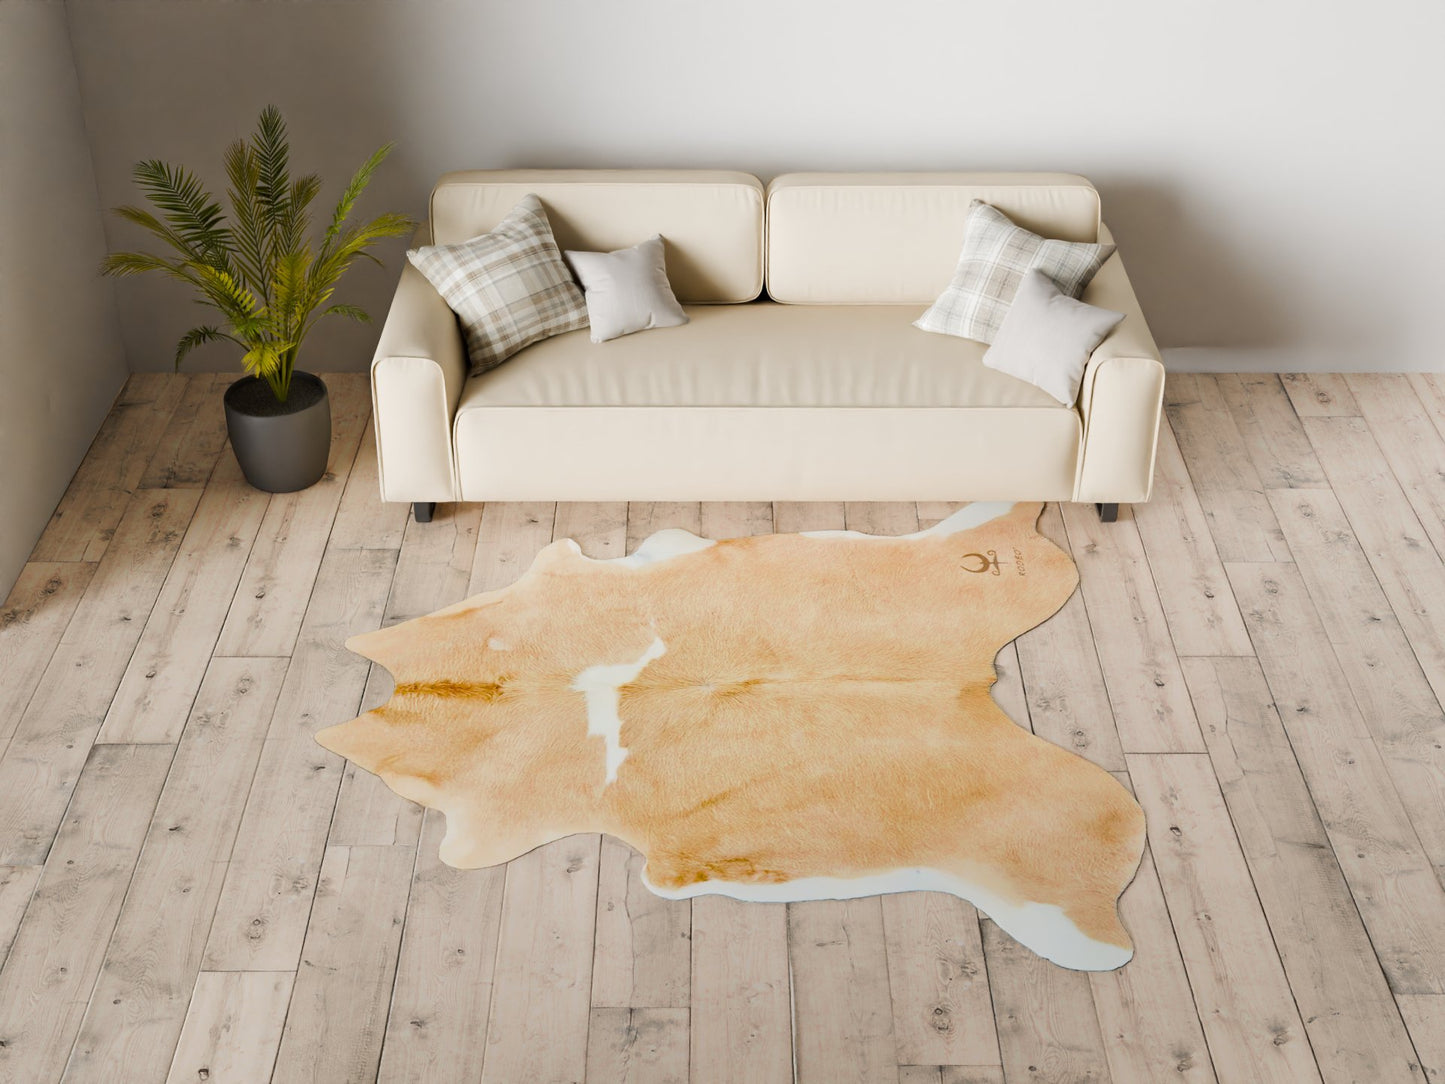 Extra Large Brown and White Cowhide Rug Size 7.4x6.8 ft---4652 - Rodeo Cowhide Rugs